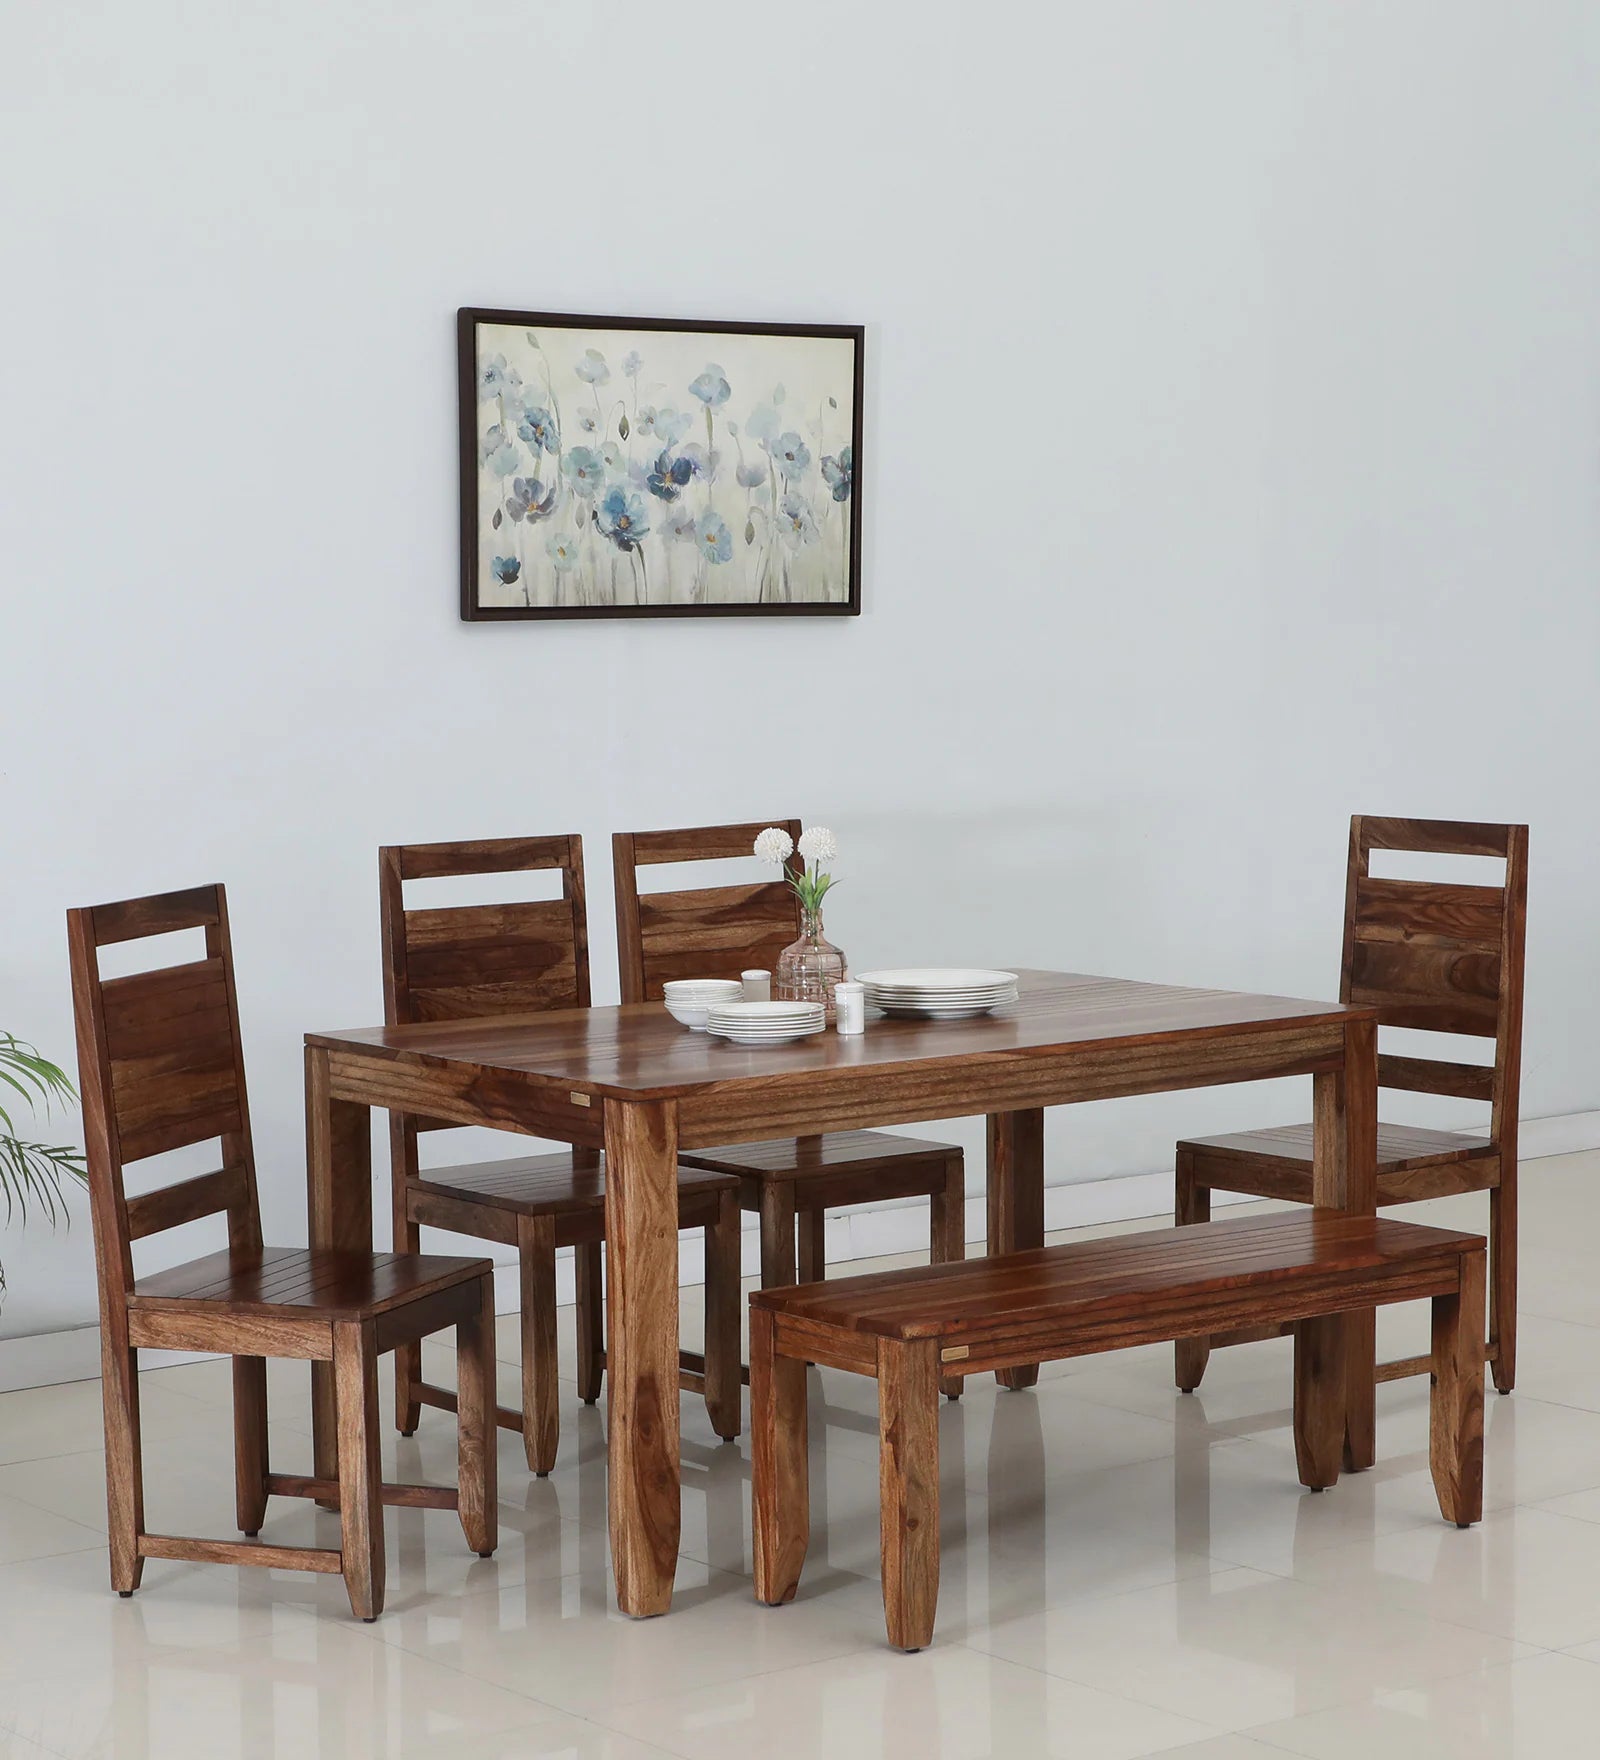 Solid Wood 6 Seater Dining Set in Scratch Resistant Rustic Teak Finish with Bench